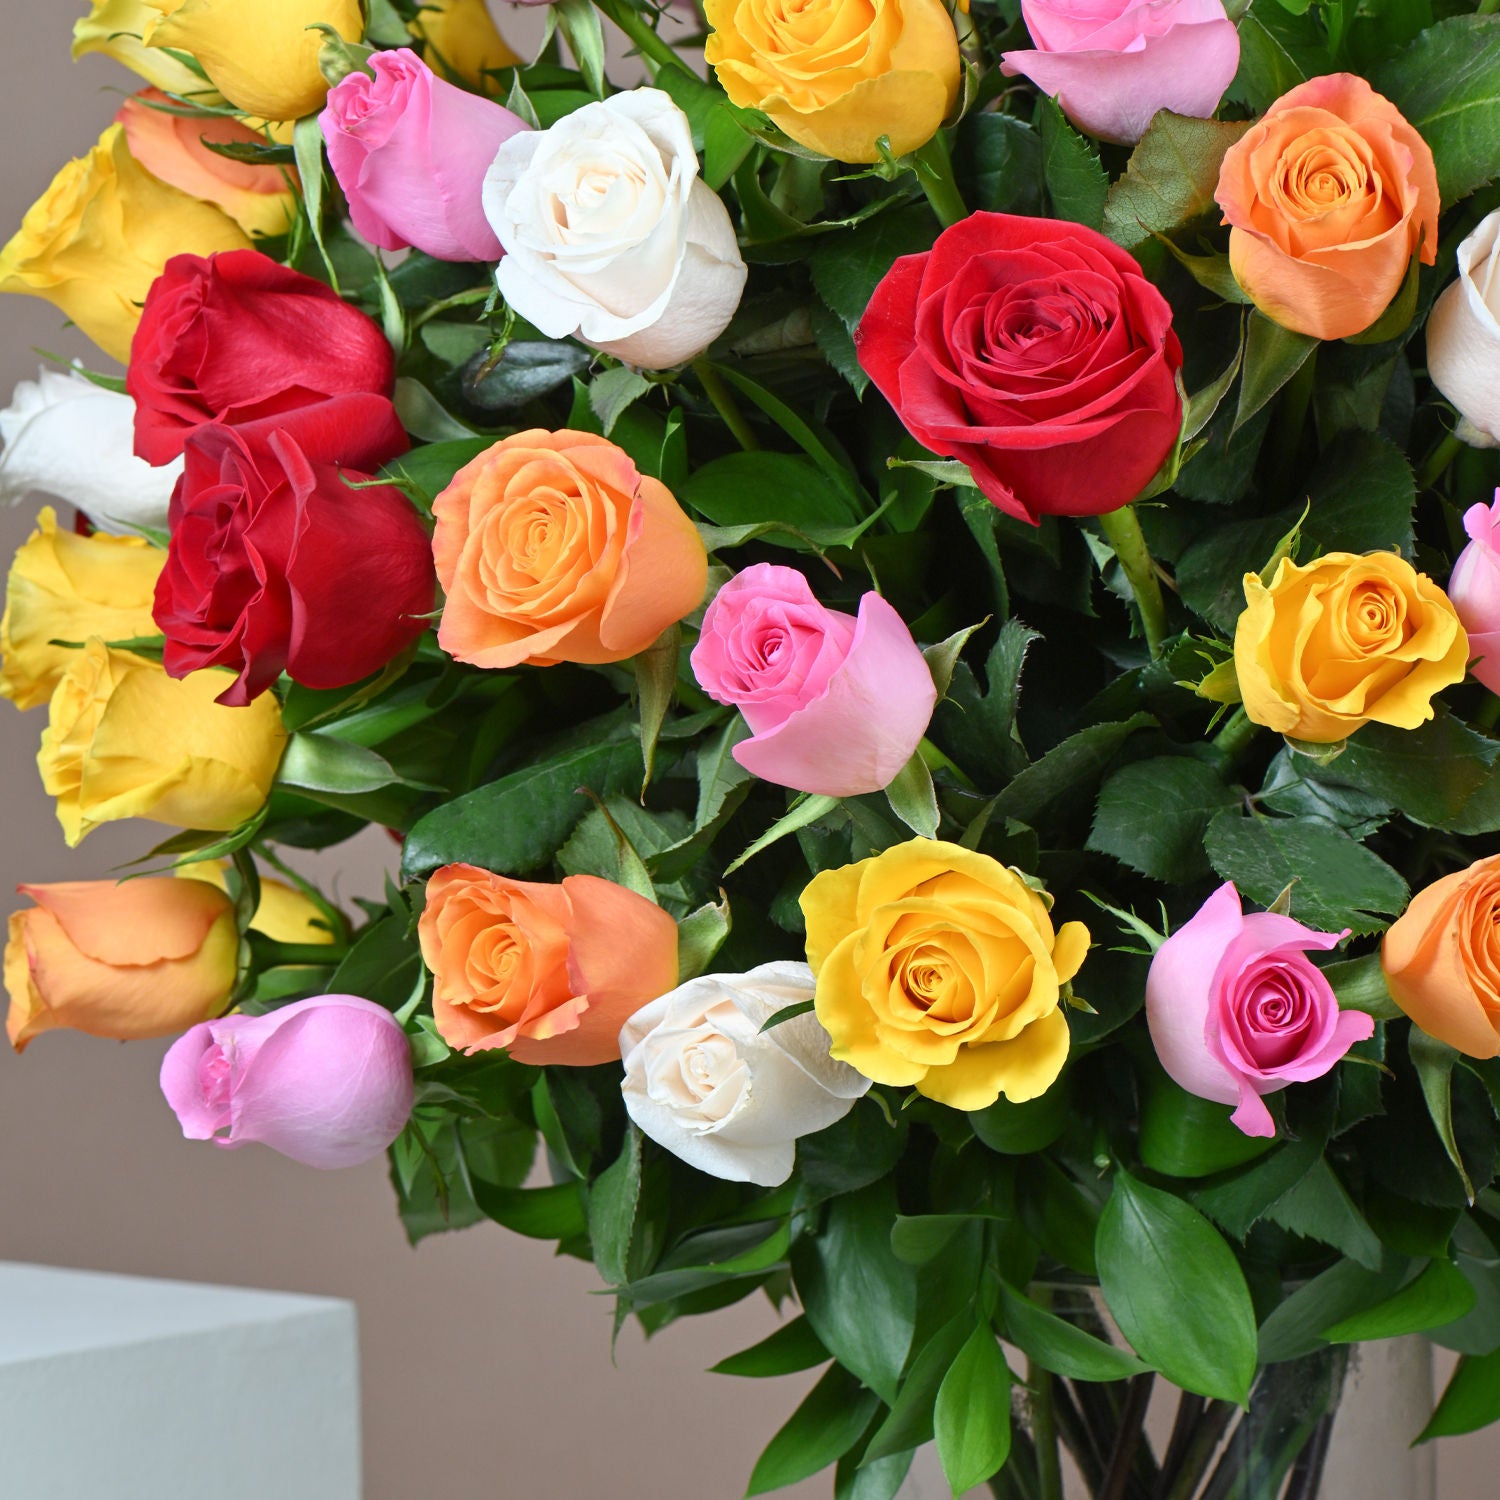 Bunch of 100 Mixed Roses In Glass Vase